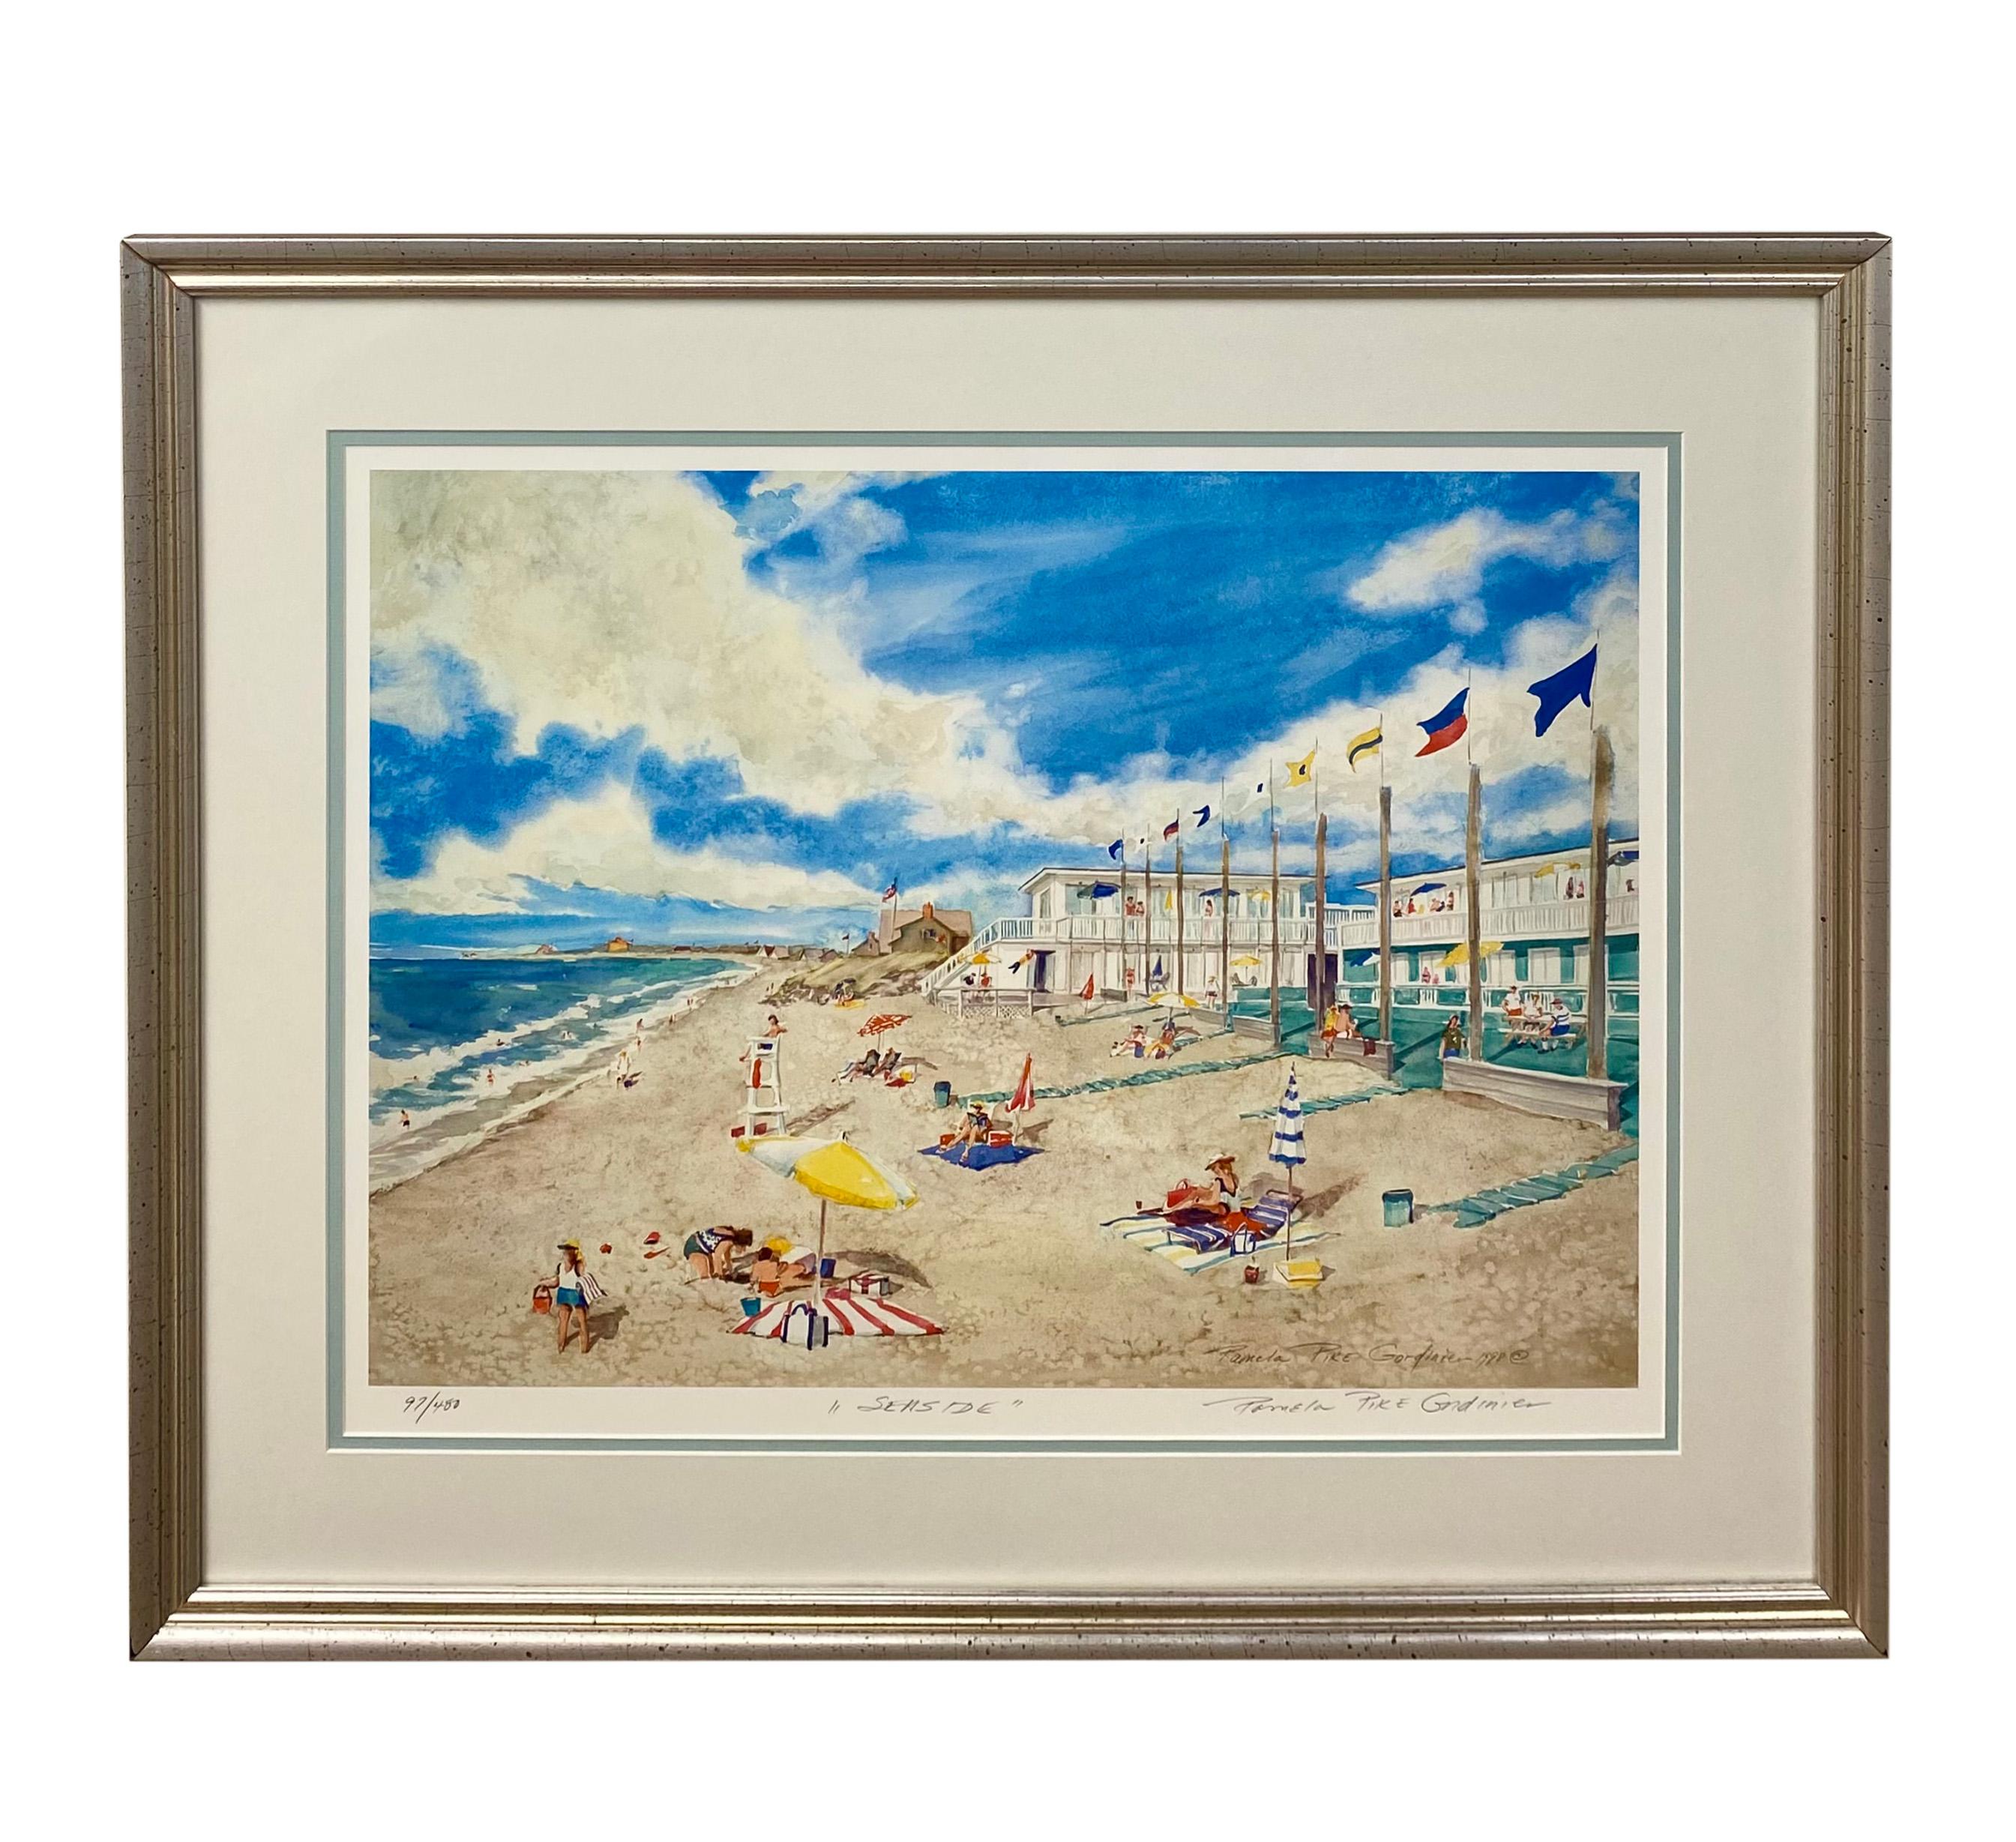 A contemporary impressionistic print entitle " Sea Side " by Pamela Pike Gordinier ( American ) numbered 97 of 450 and dated 1988. The print depicts a summer scene of the beach showing people enjoying the sea side. The print is matted and framed.